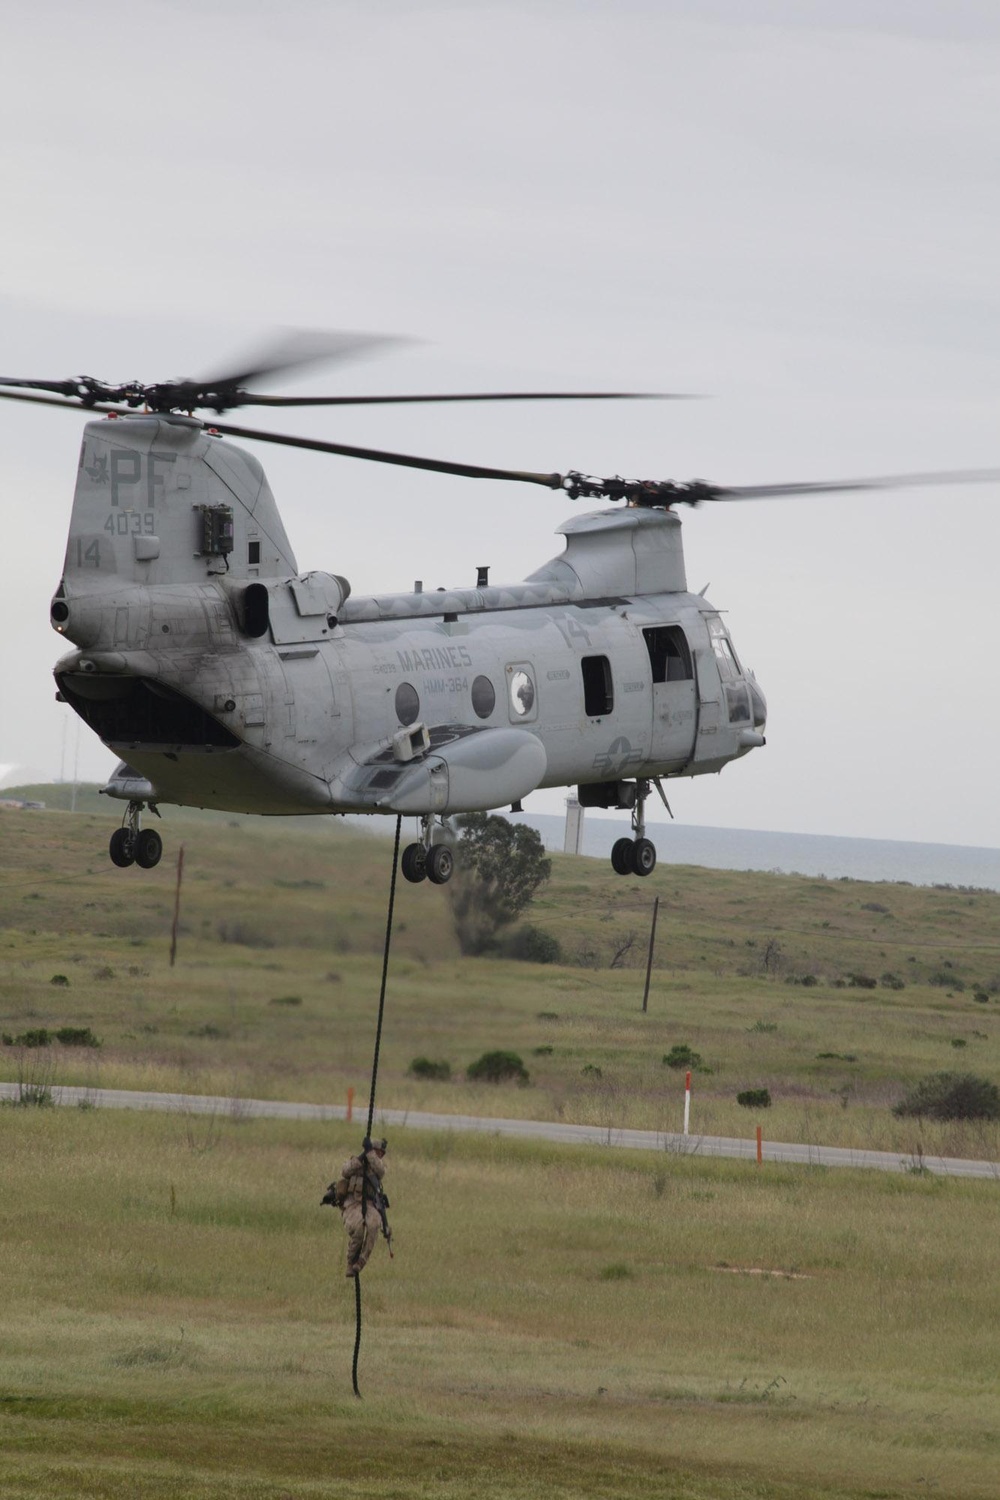 2/7, HMM-364 execute fast-rope training